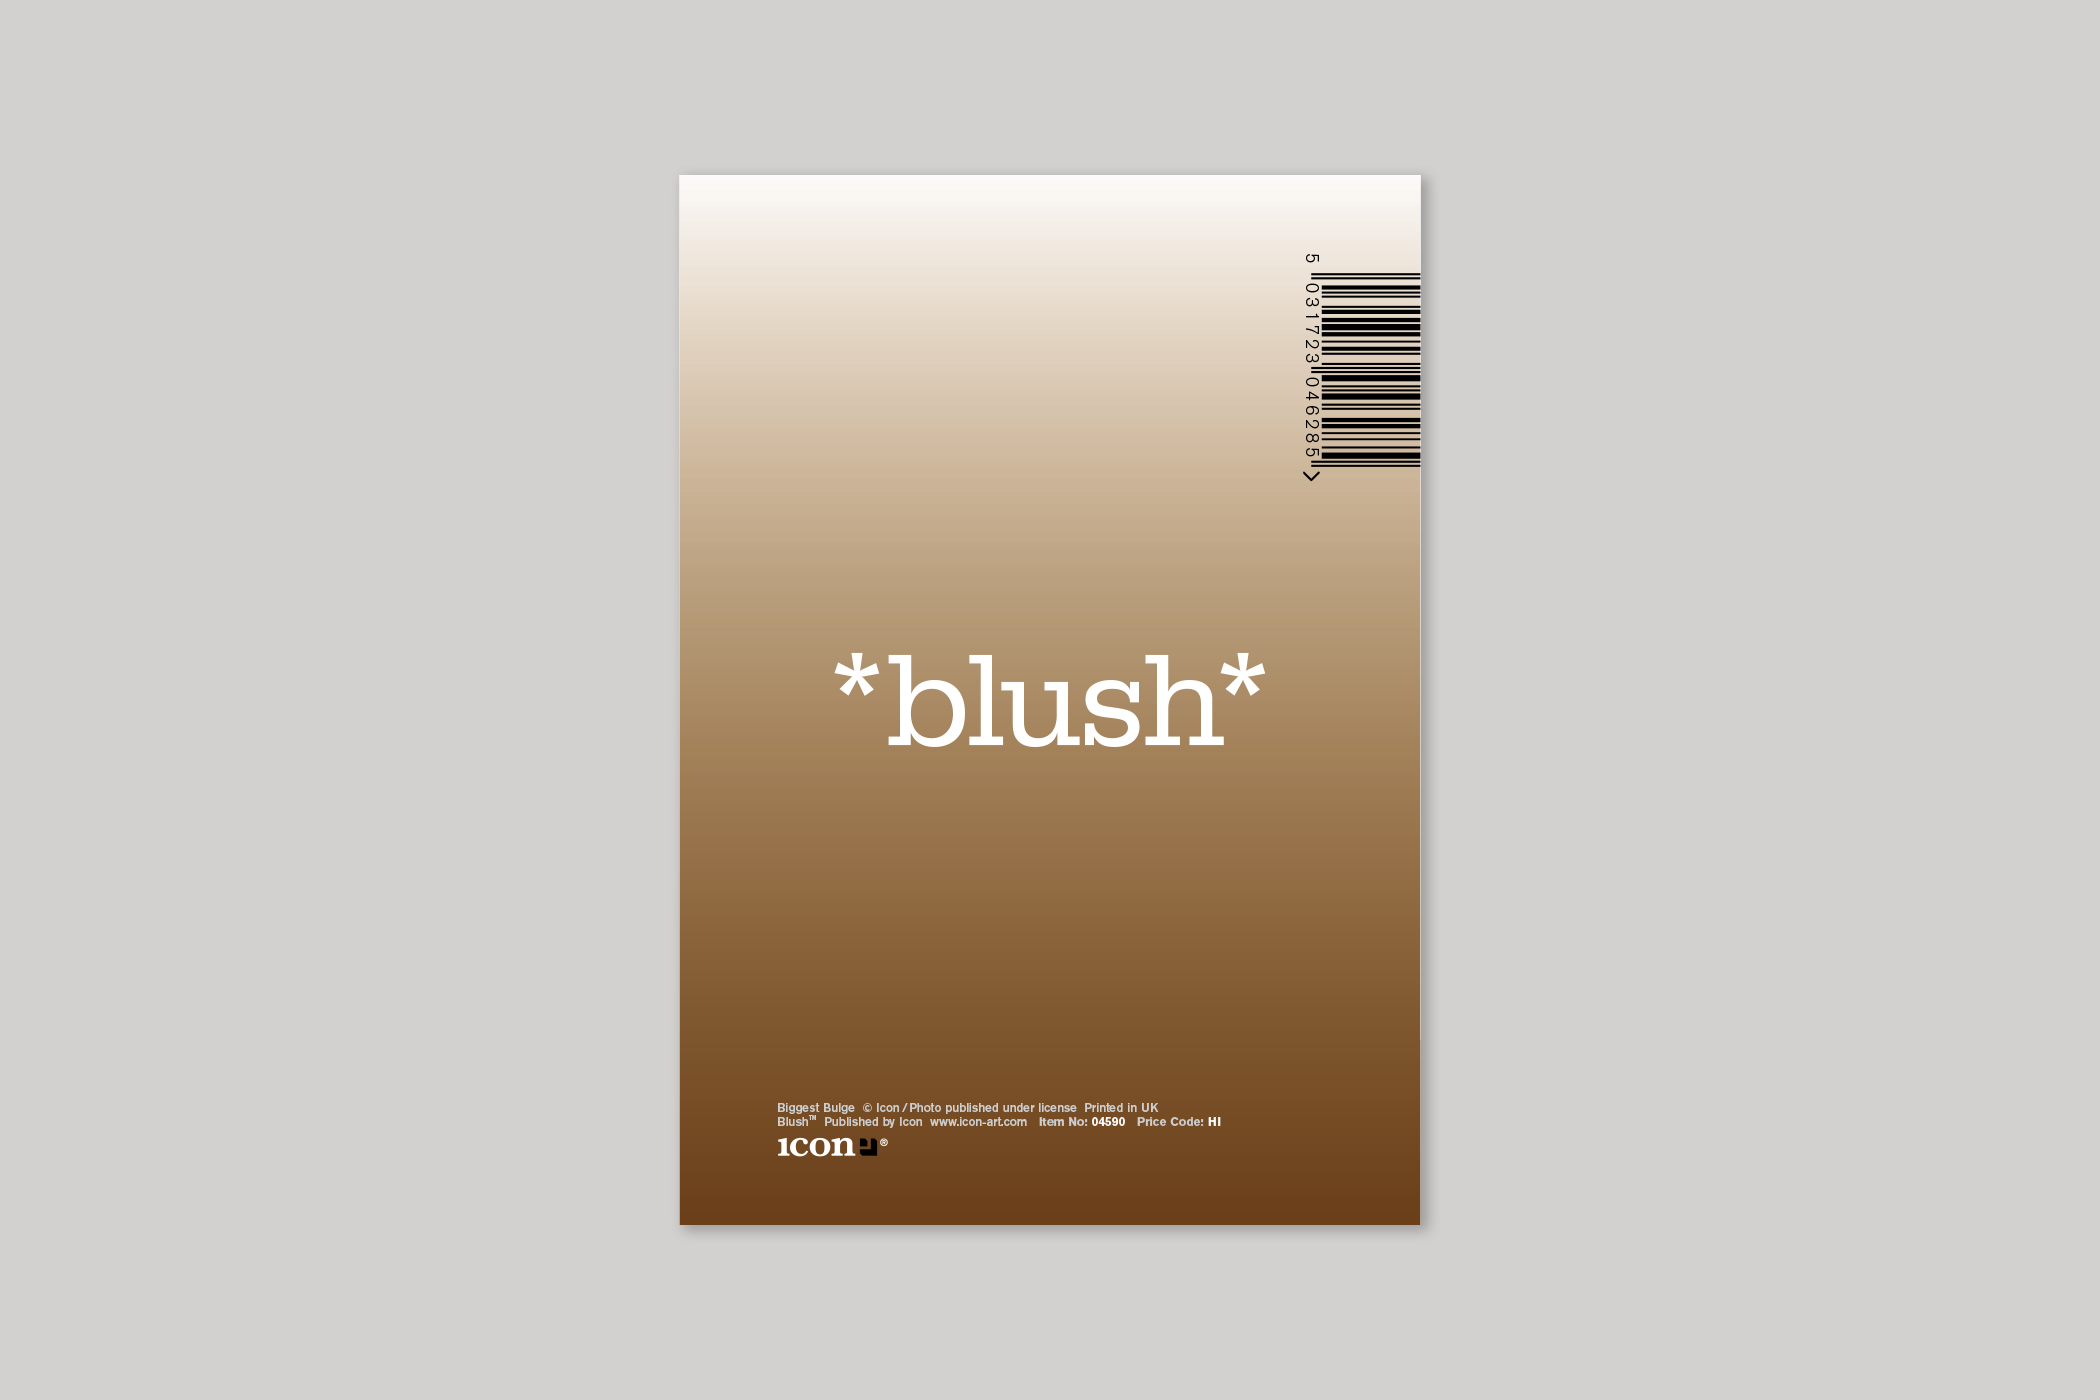 Biggest Bulge from Blush humour range of greeting cards by Icon, with envelope.